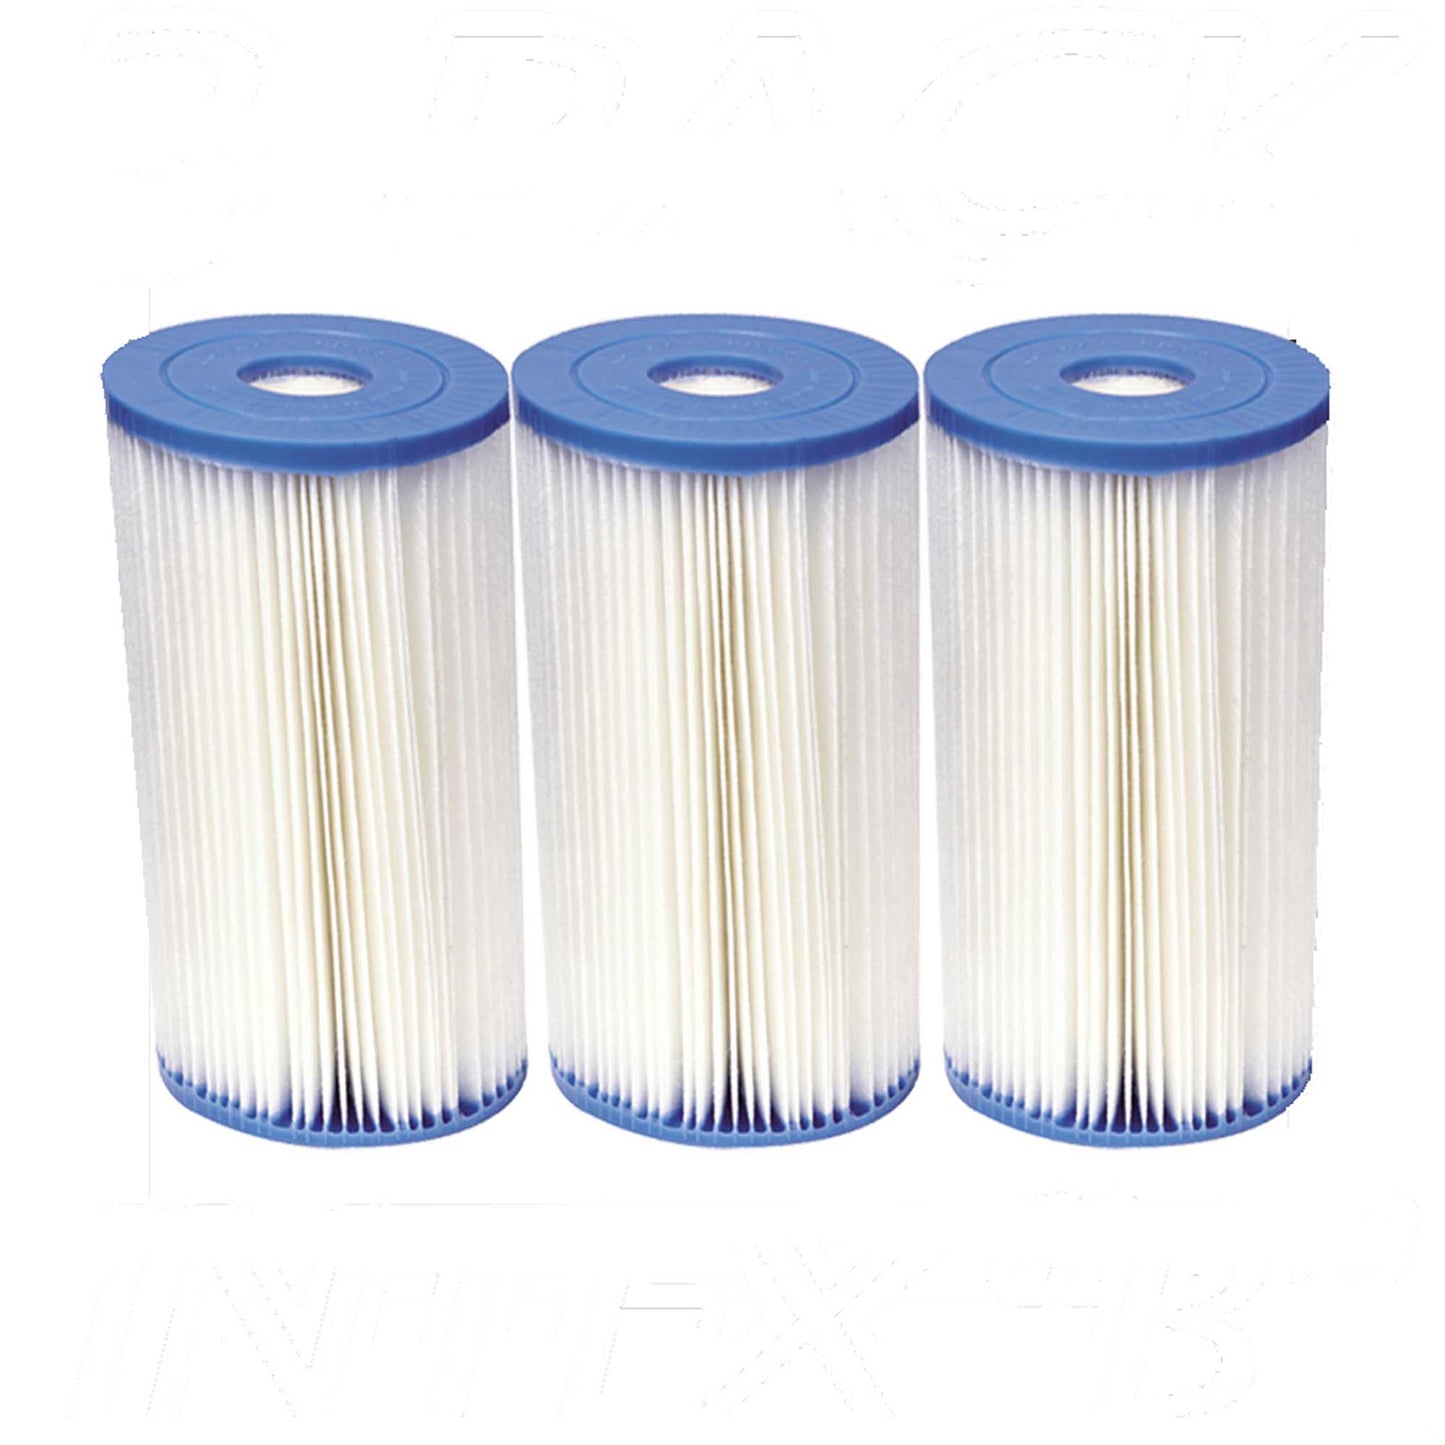 3 Pack Intex Type B Filter Cartridge for Above Ground Swimming Pool Pumps